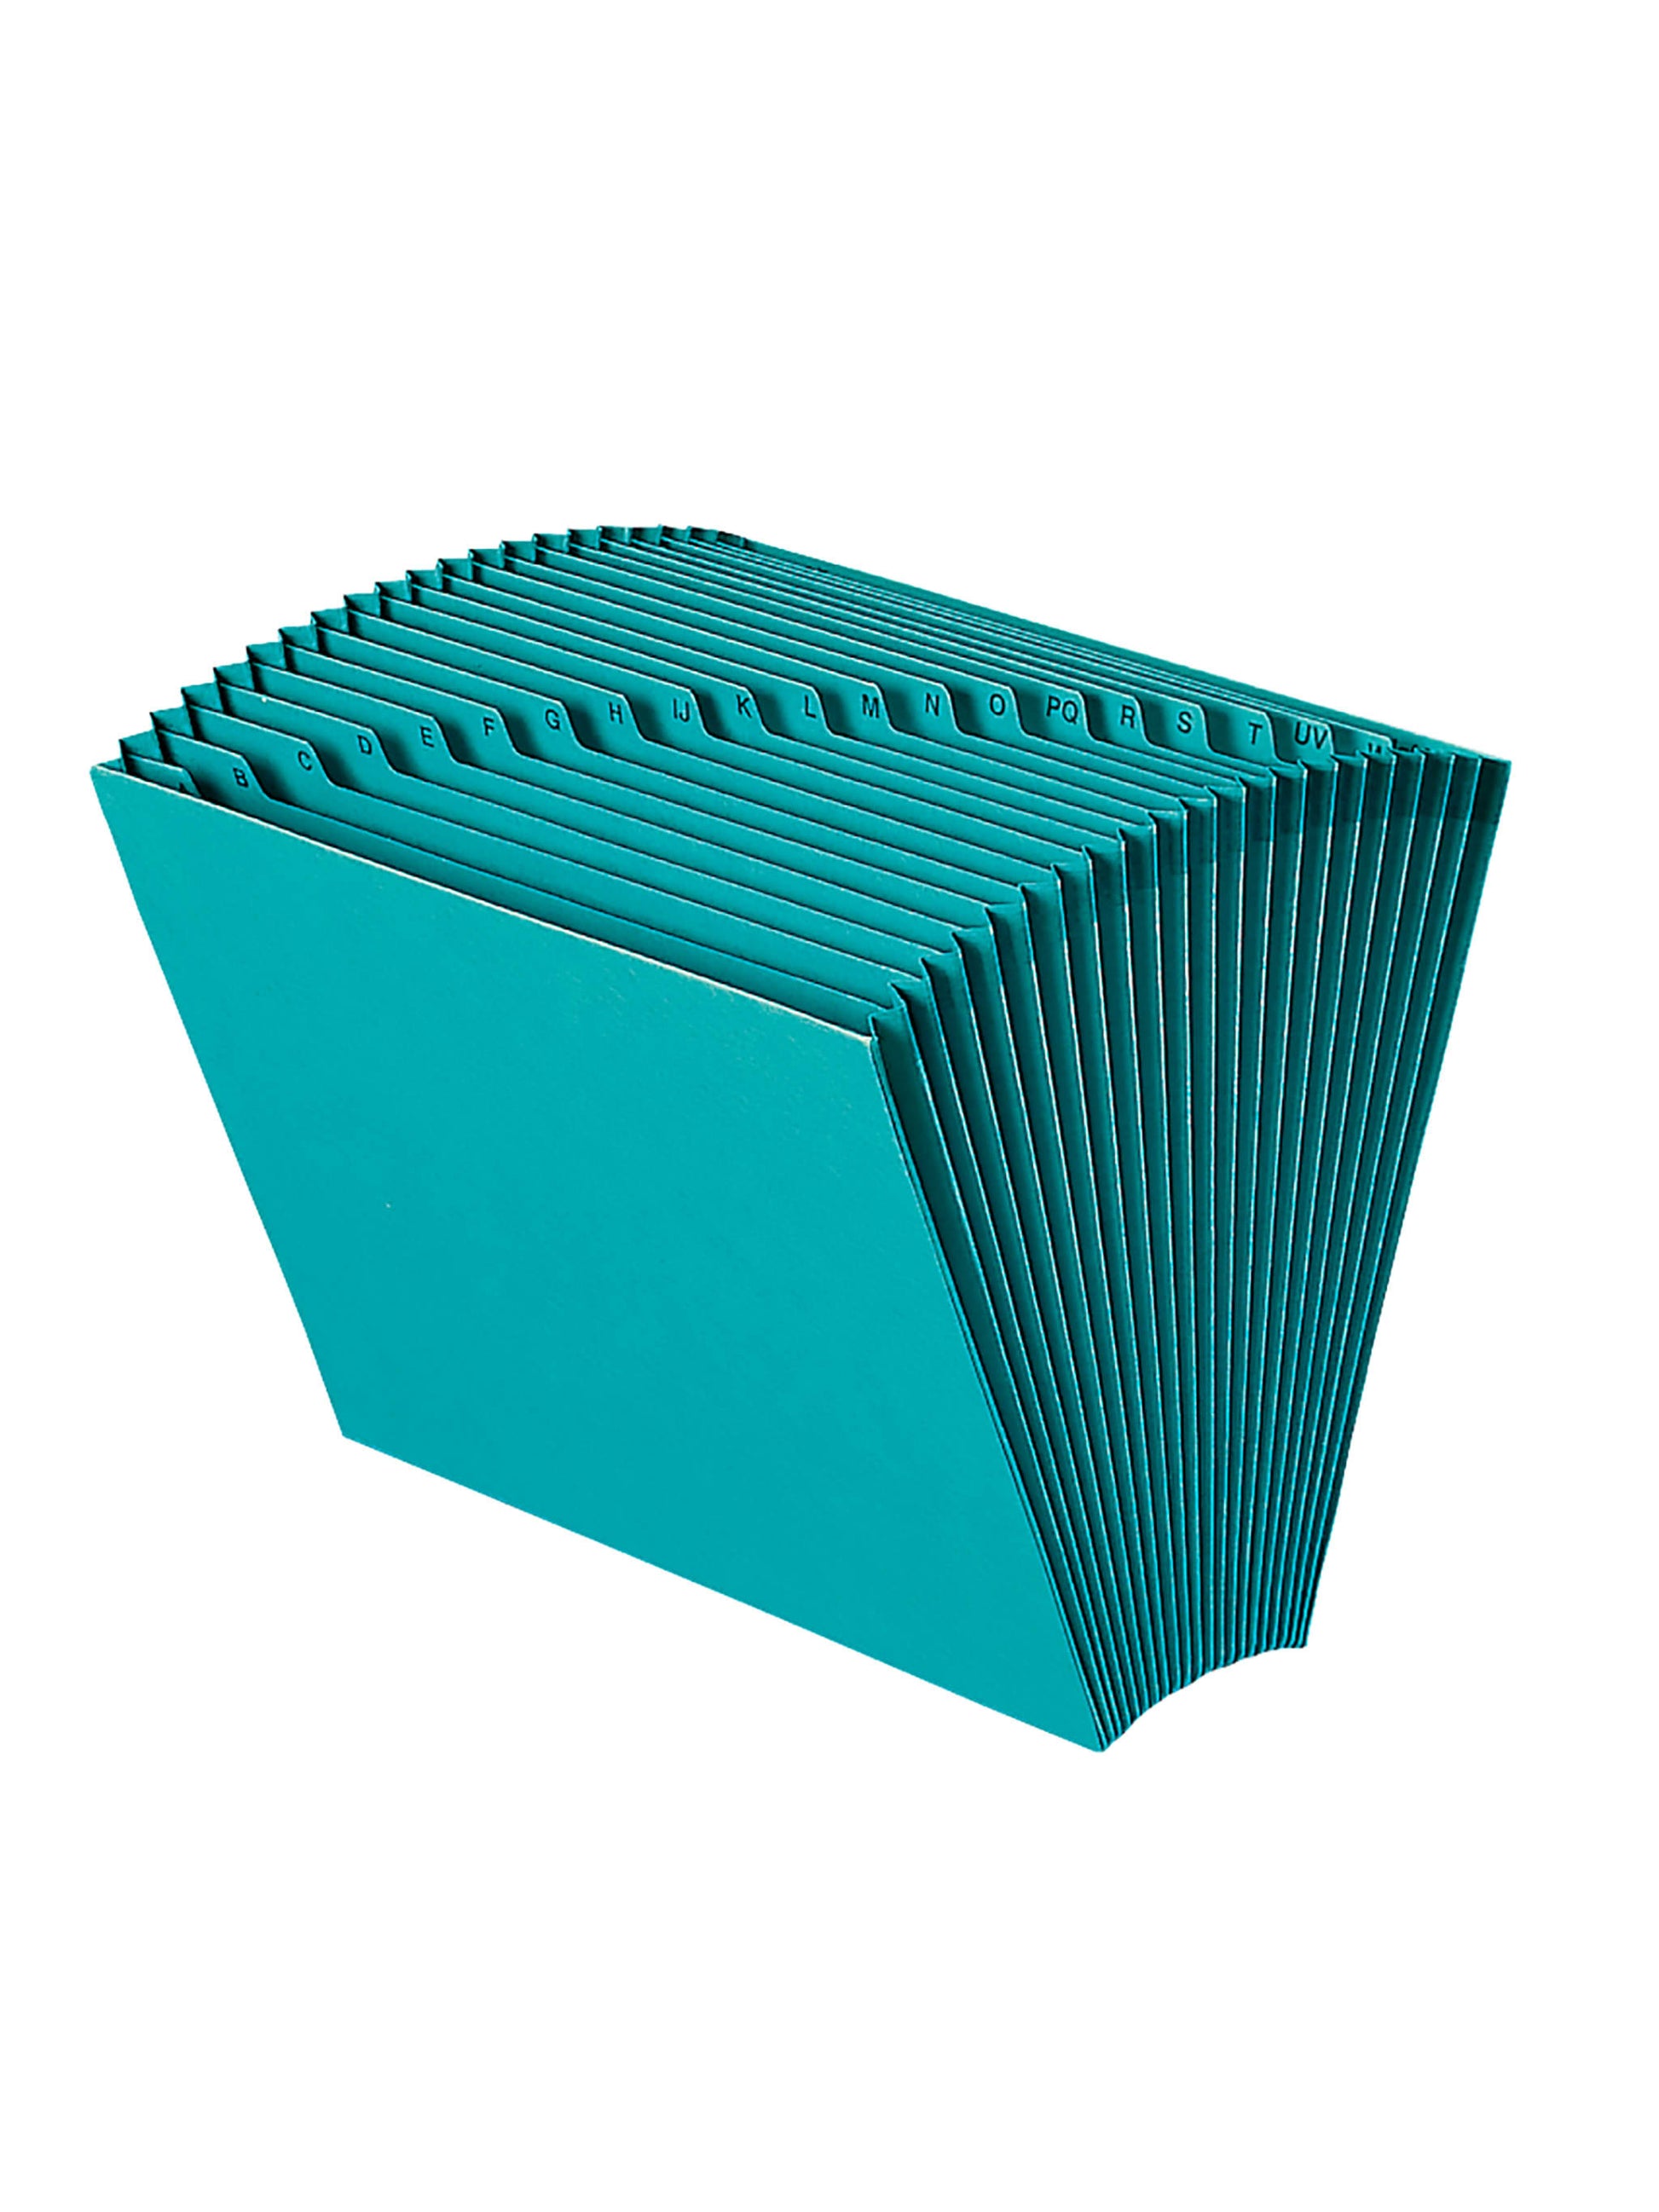 Colored Expanding Files, 21 Pockets, Alphabetic A-Z, Teal Color, Letter Size, Set of 1, 086486707176